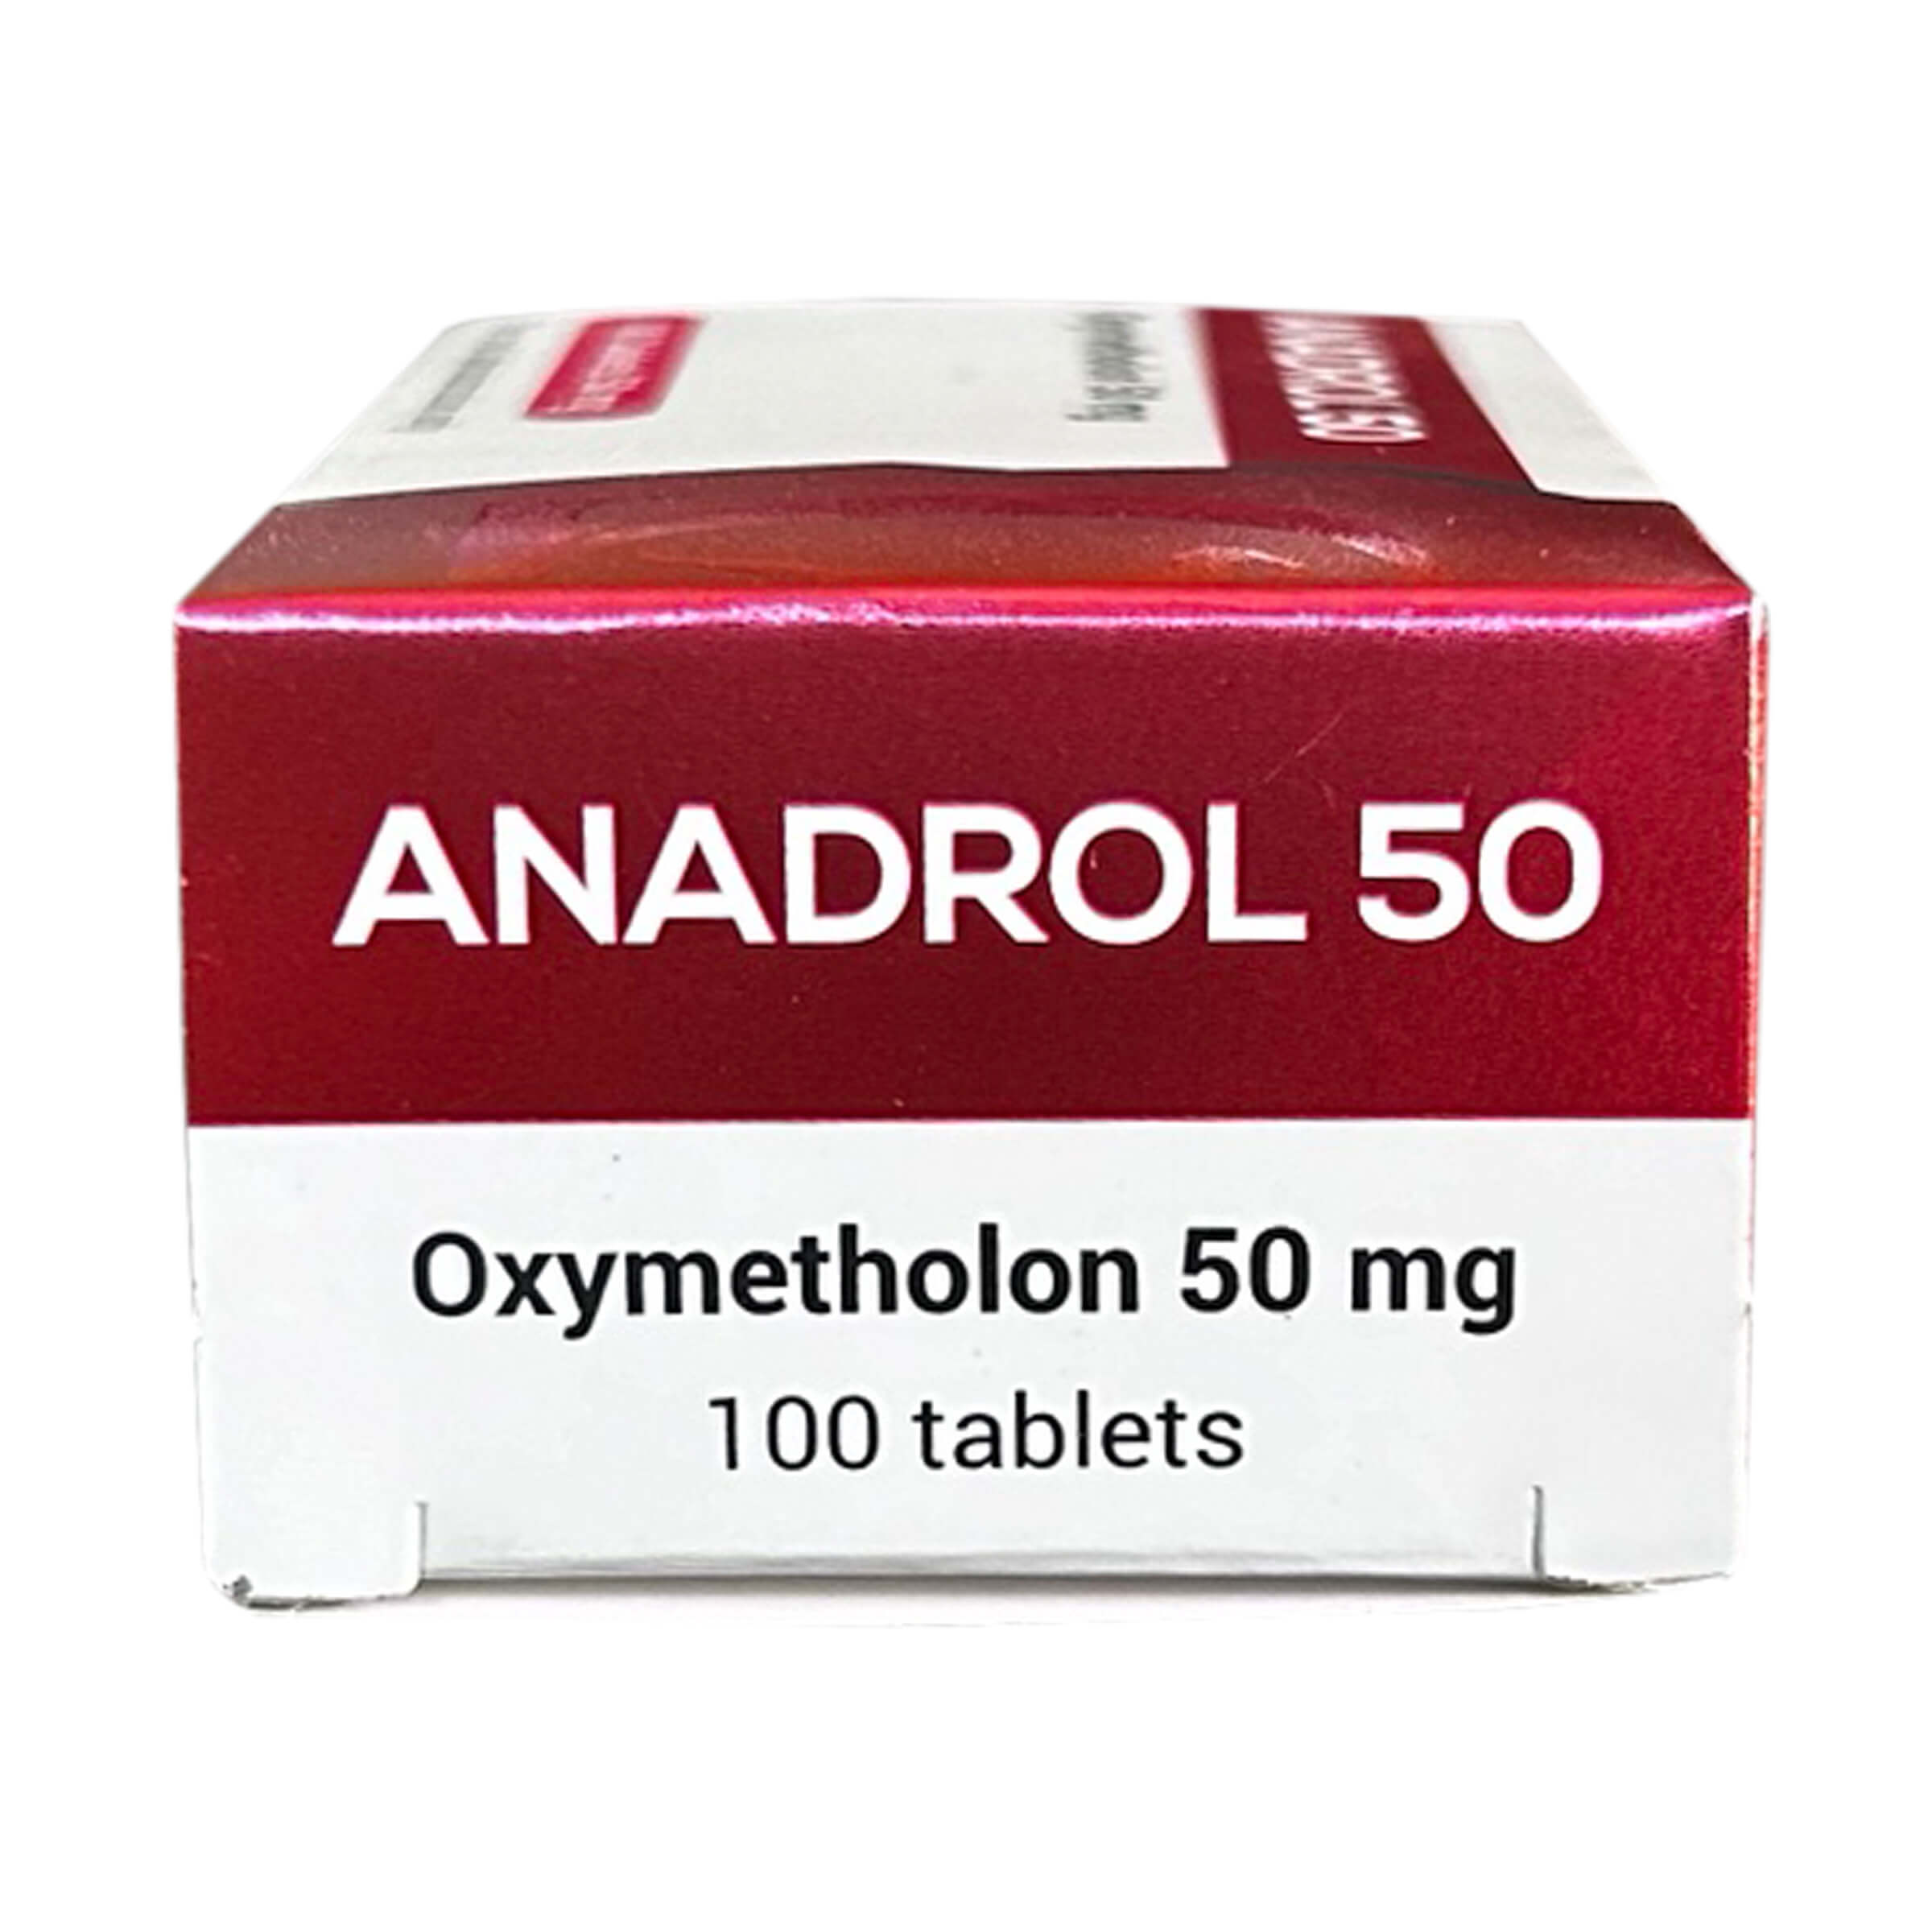 OmegaMeds_Anadrol_50_Oral_Anabolic_Steroid_Androgenic_Mass-Gain_Oxymetholone_oral_Tablets_muscle_hunter_muscle_gains_xsf_group